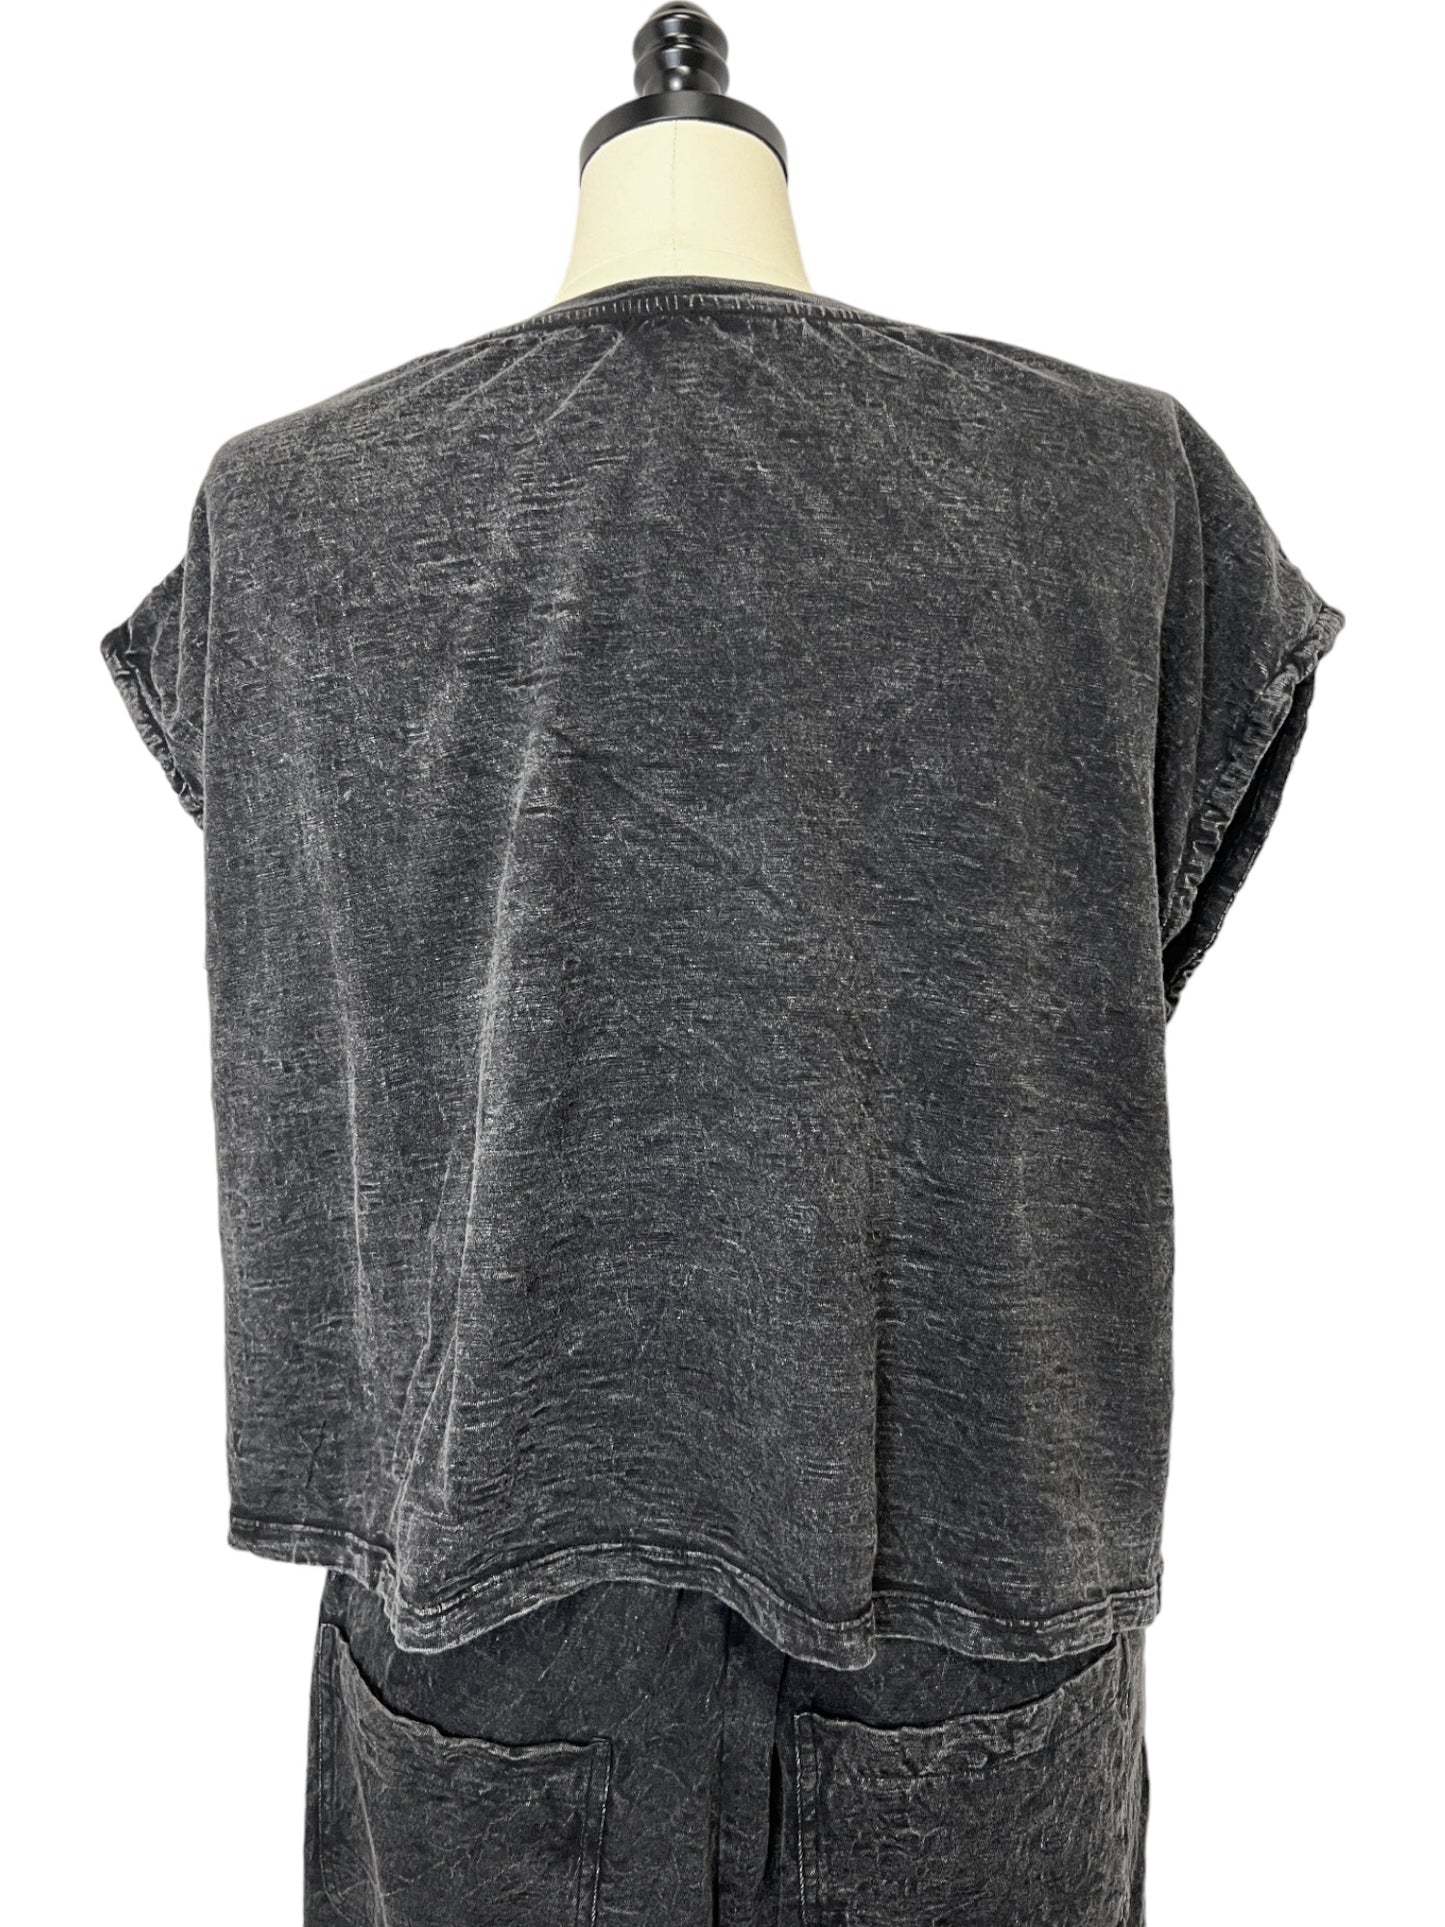 Cap Sleeve T-Shirt in Faded Black